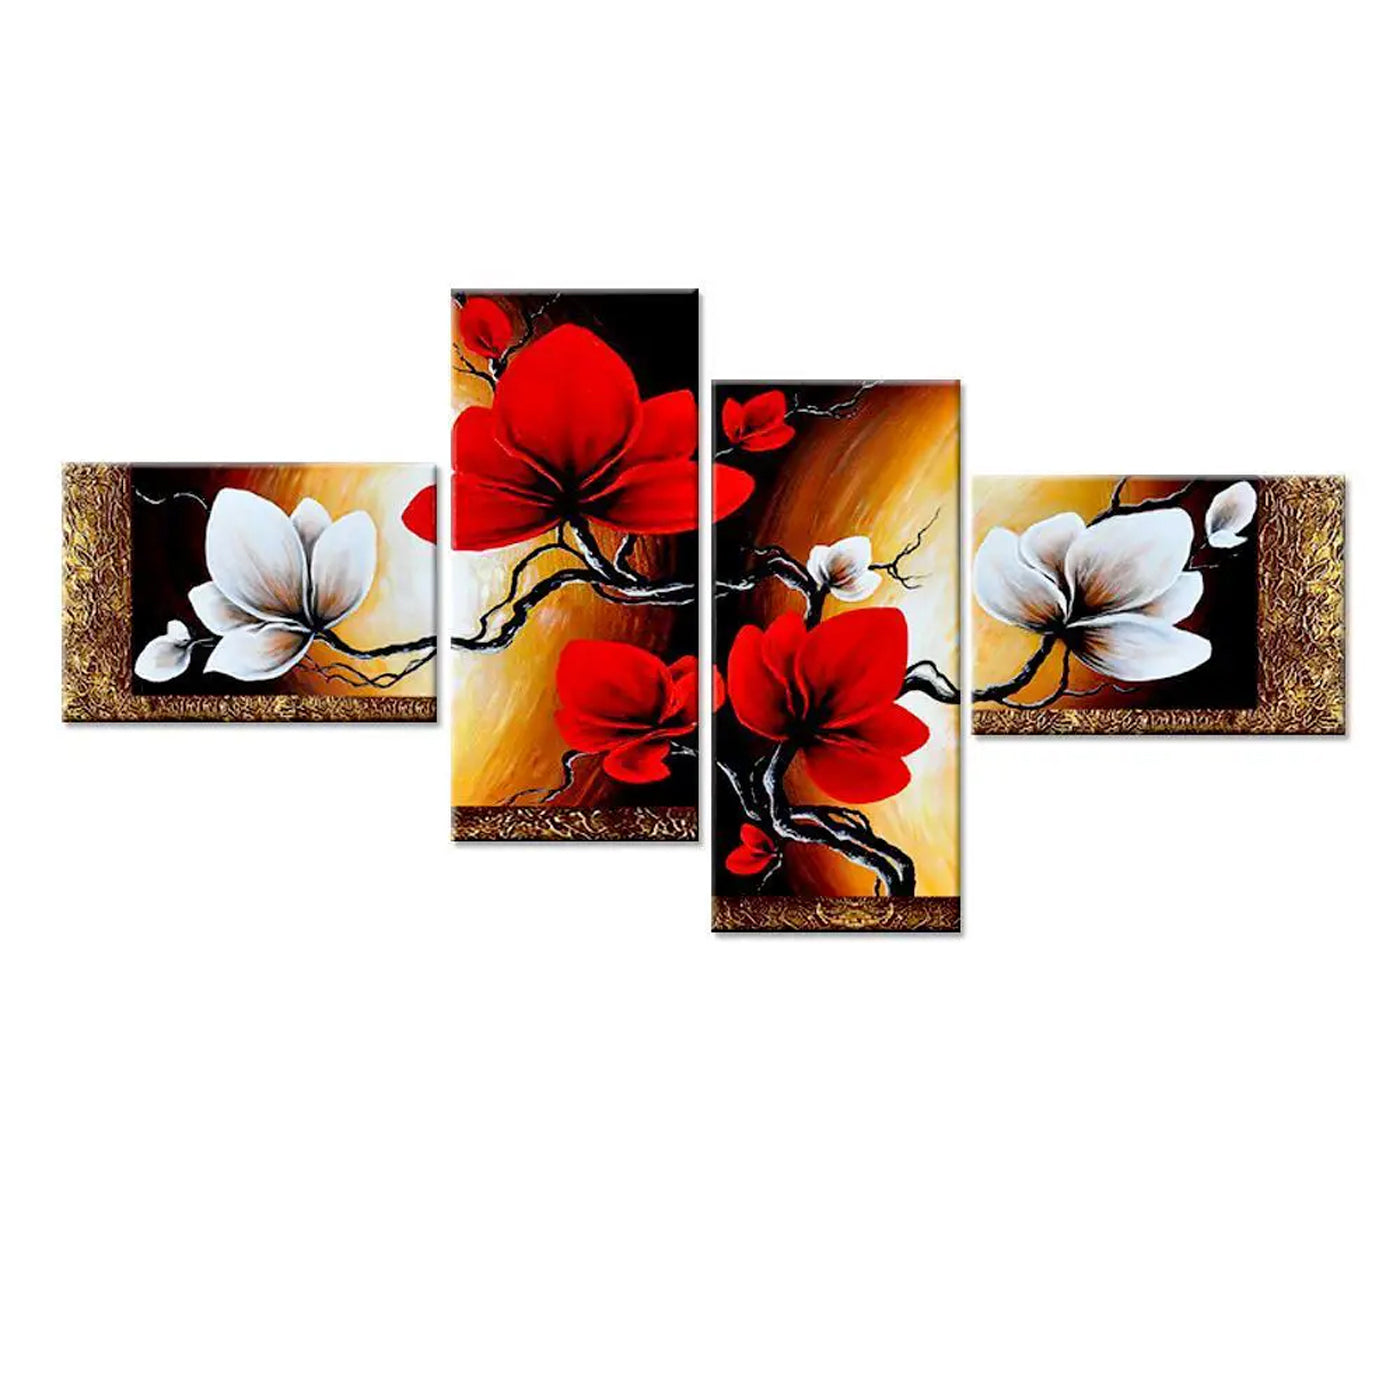 Stroke of Nature's Artistry | Four Panel Wall Art Painting